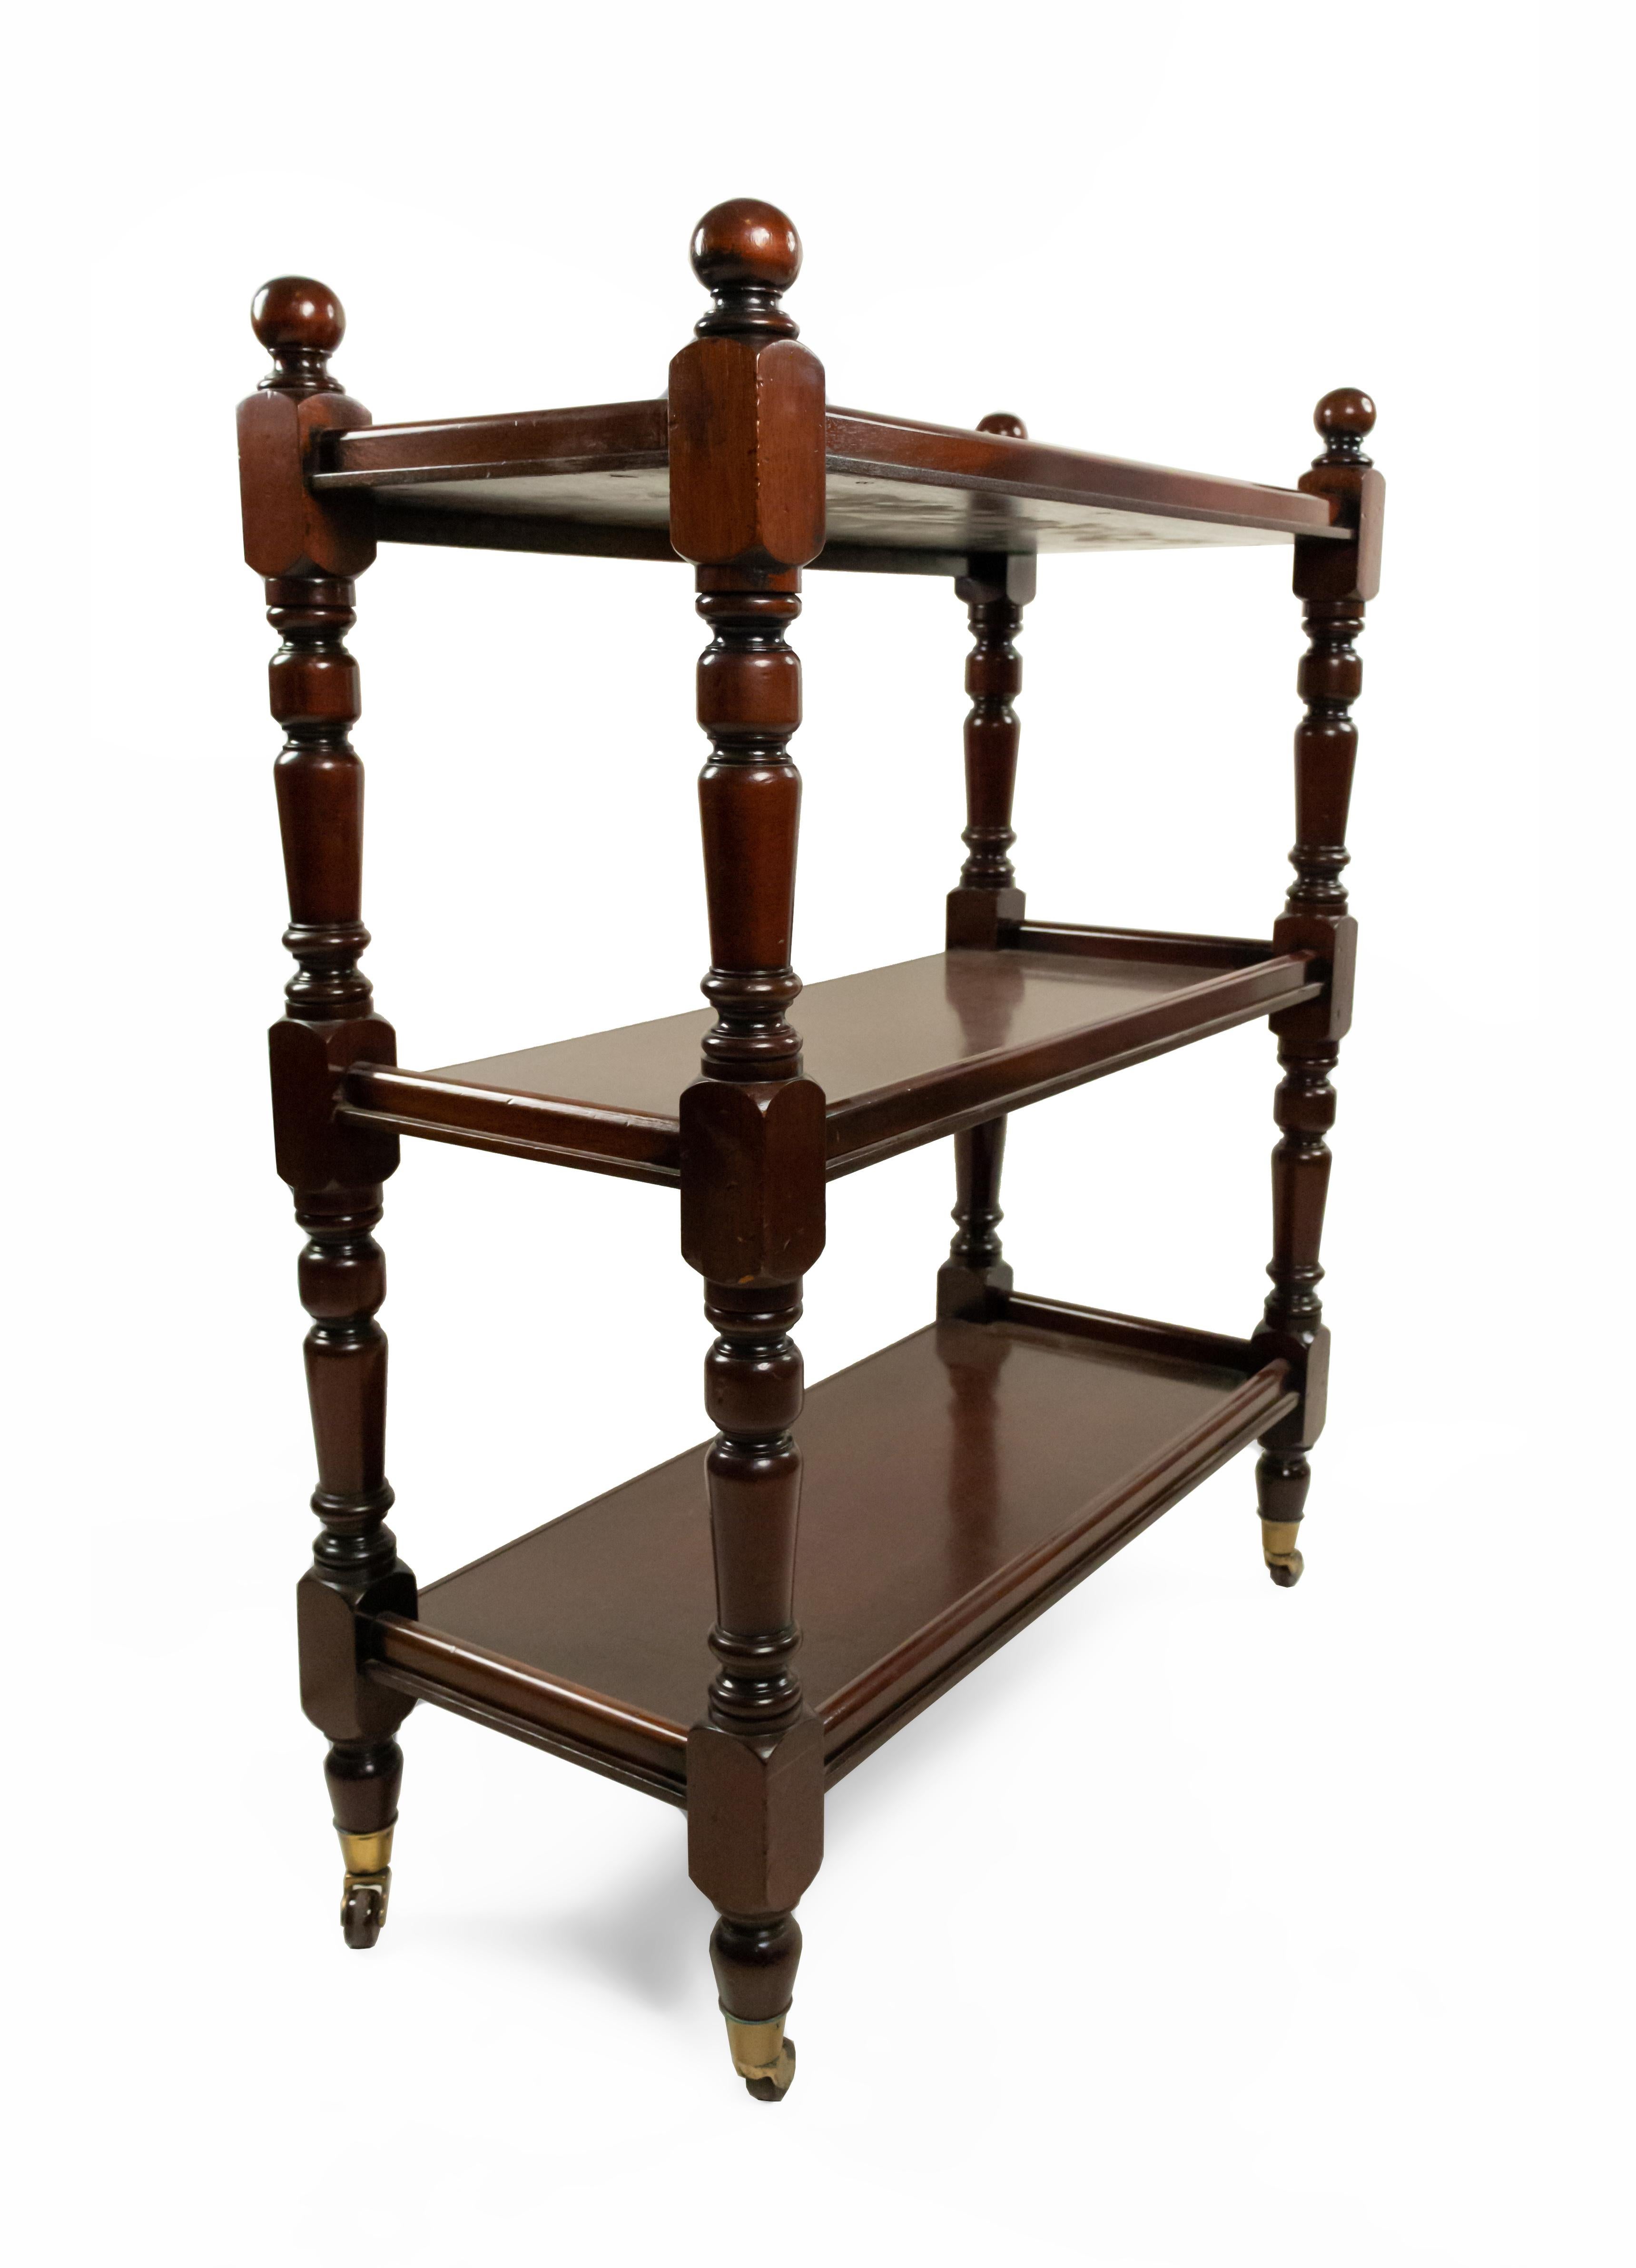 English Victorian mahogany 3-shelf étagère with four finials and casters on legs.